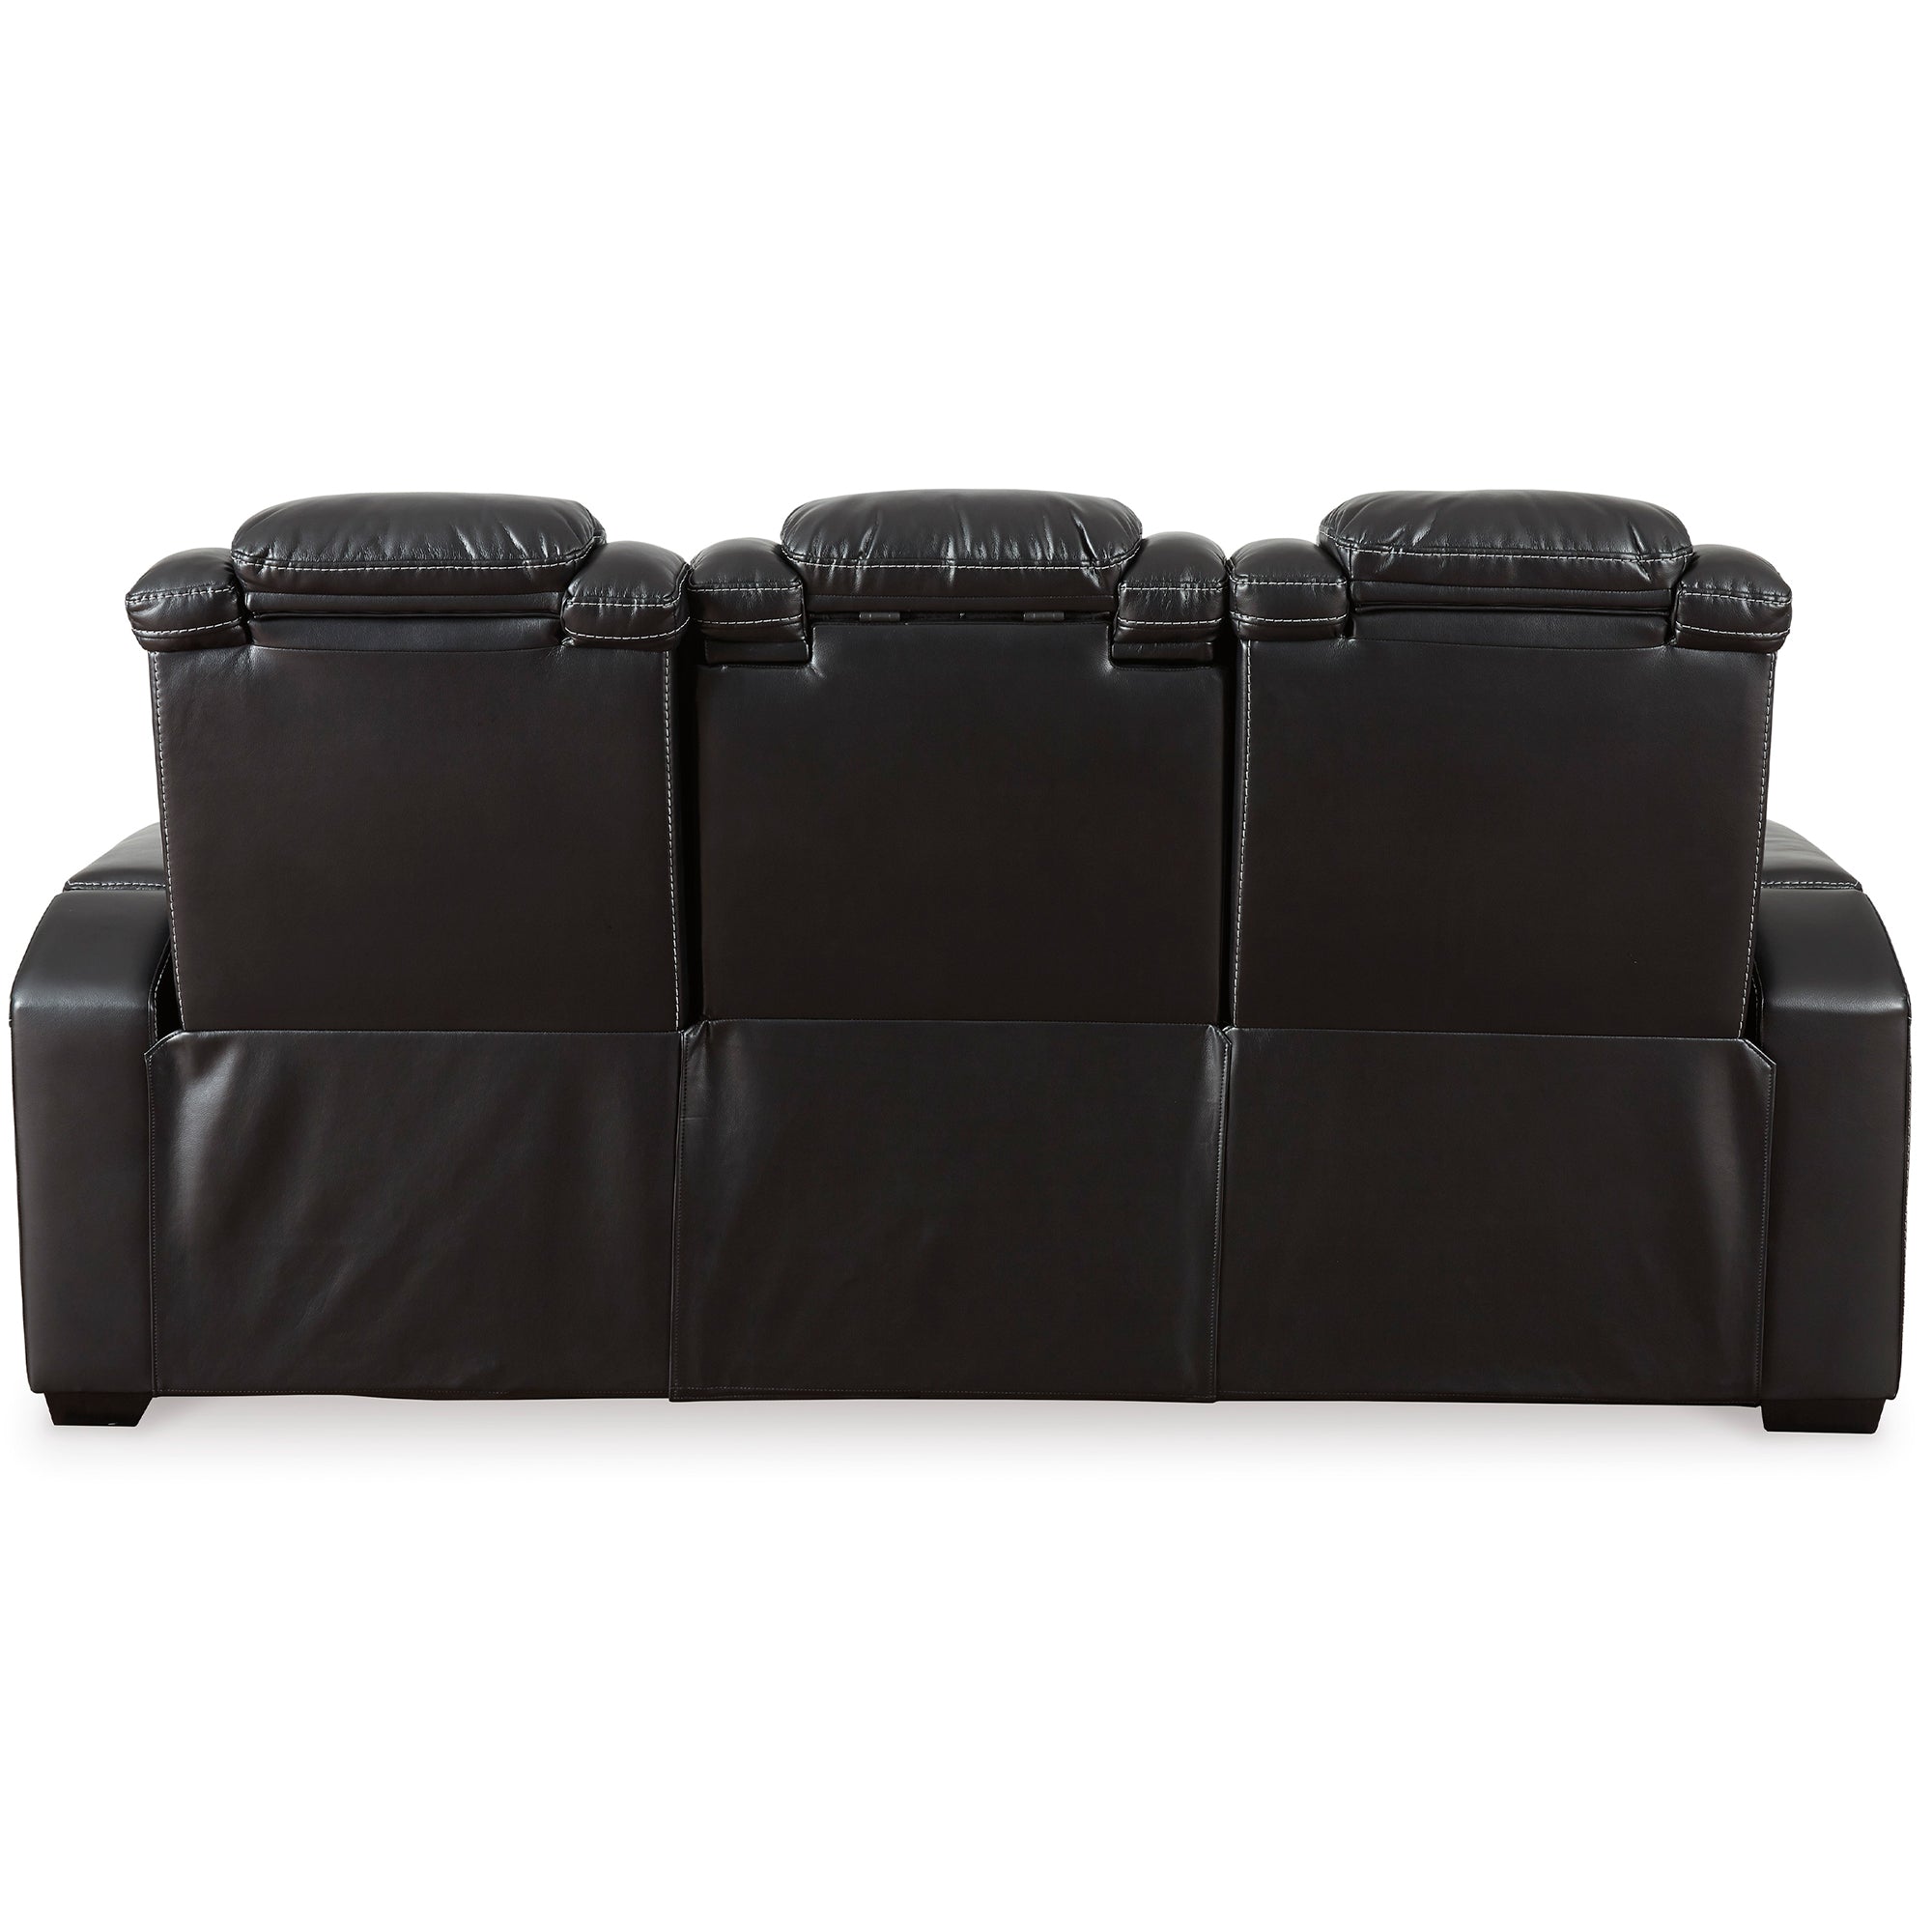 Party Time Dual Power Reclining Sofa